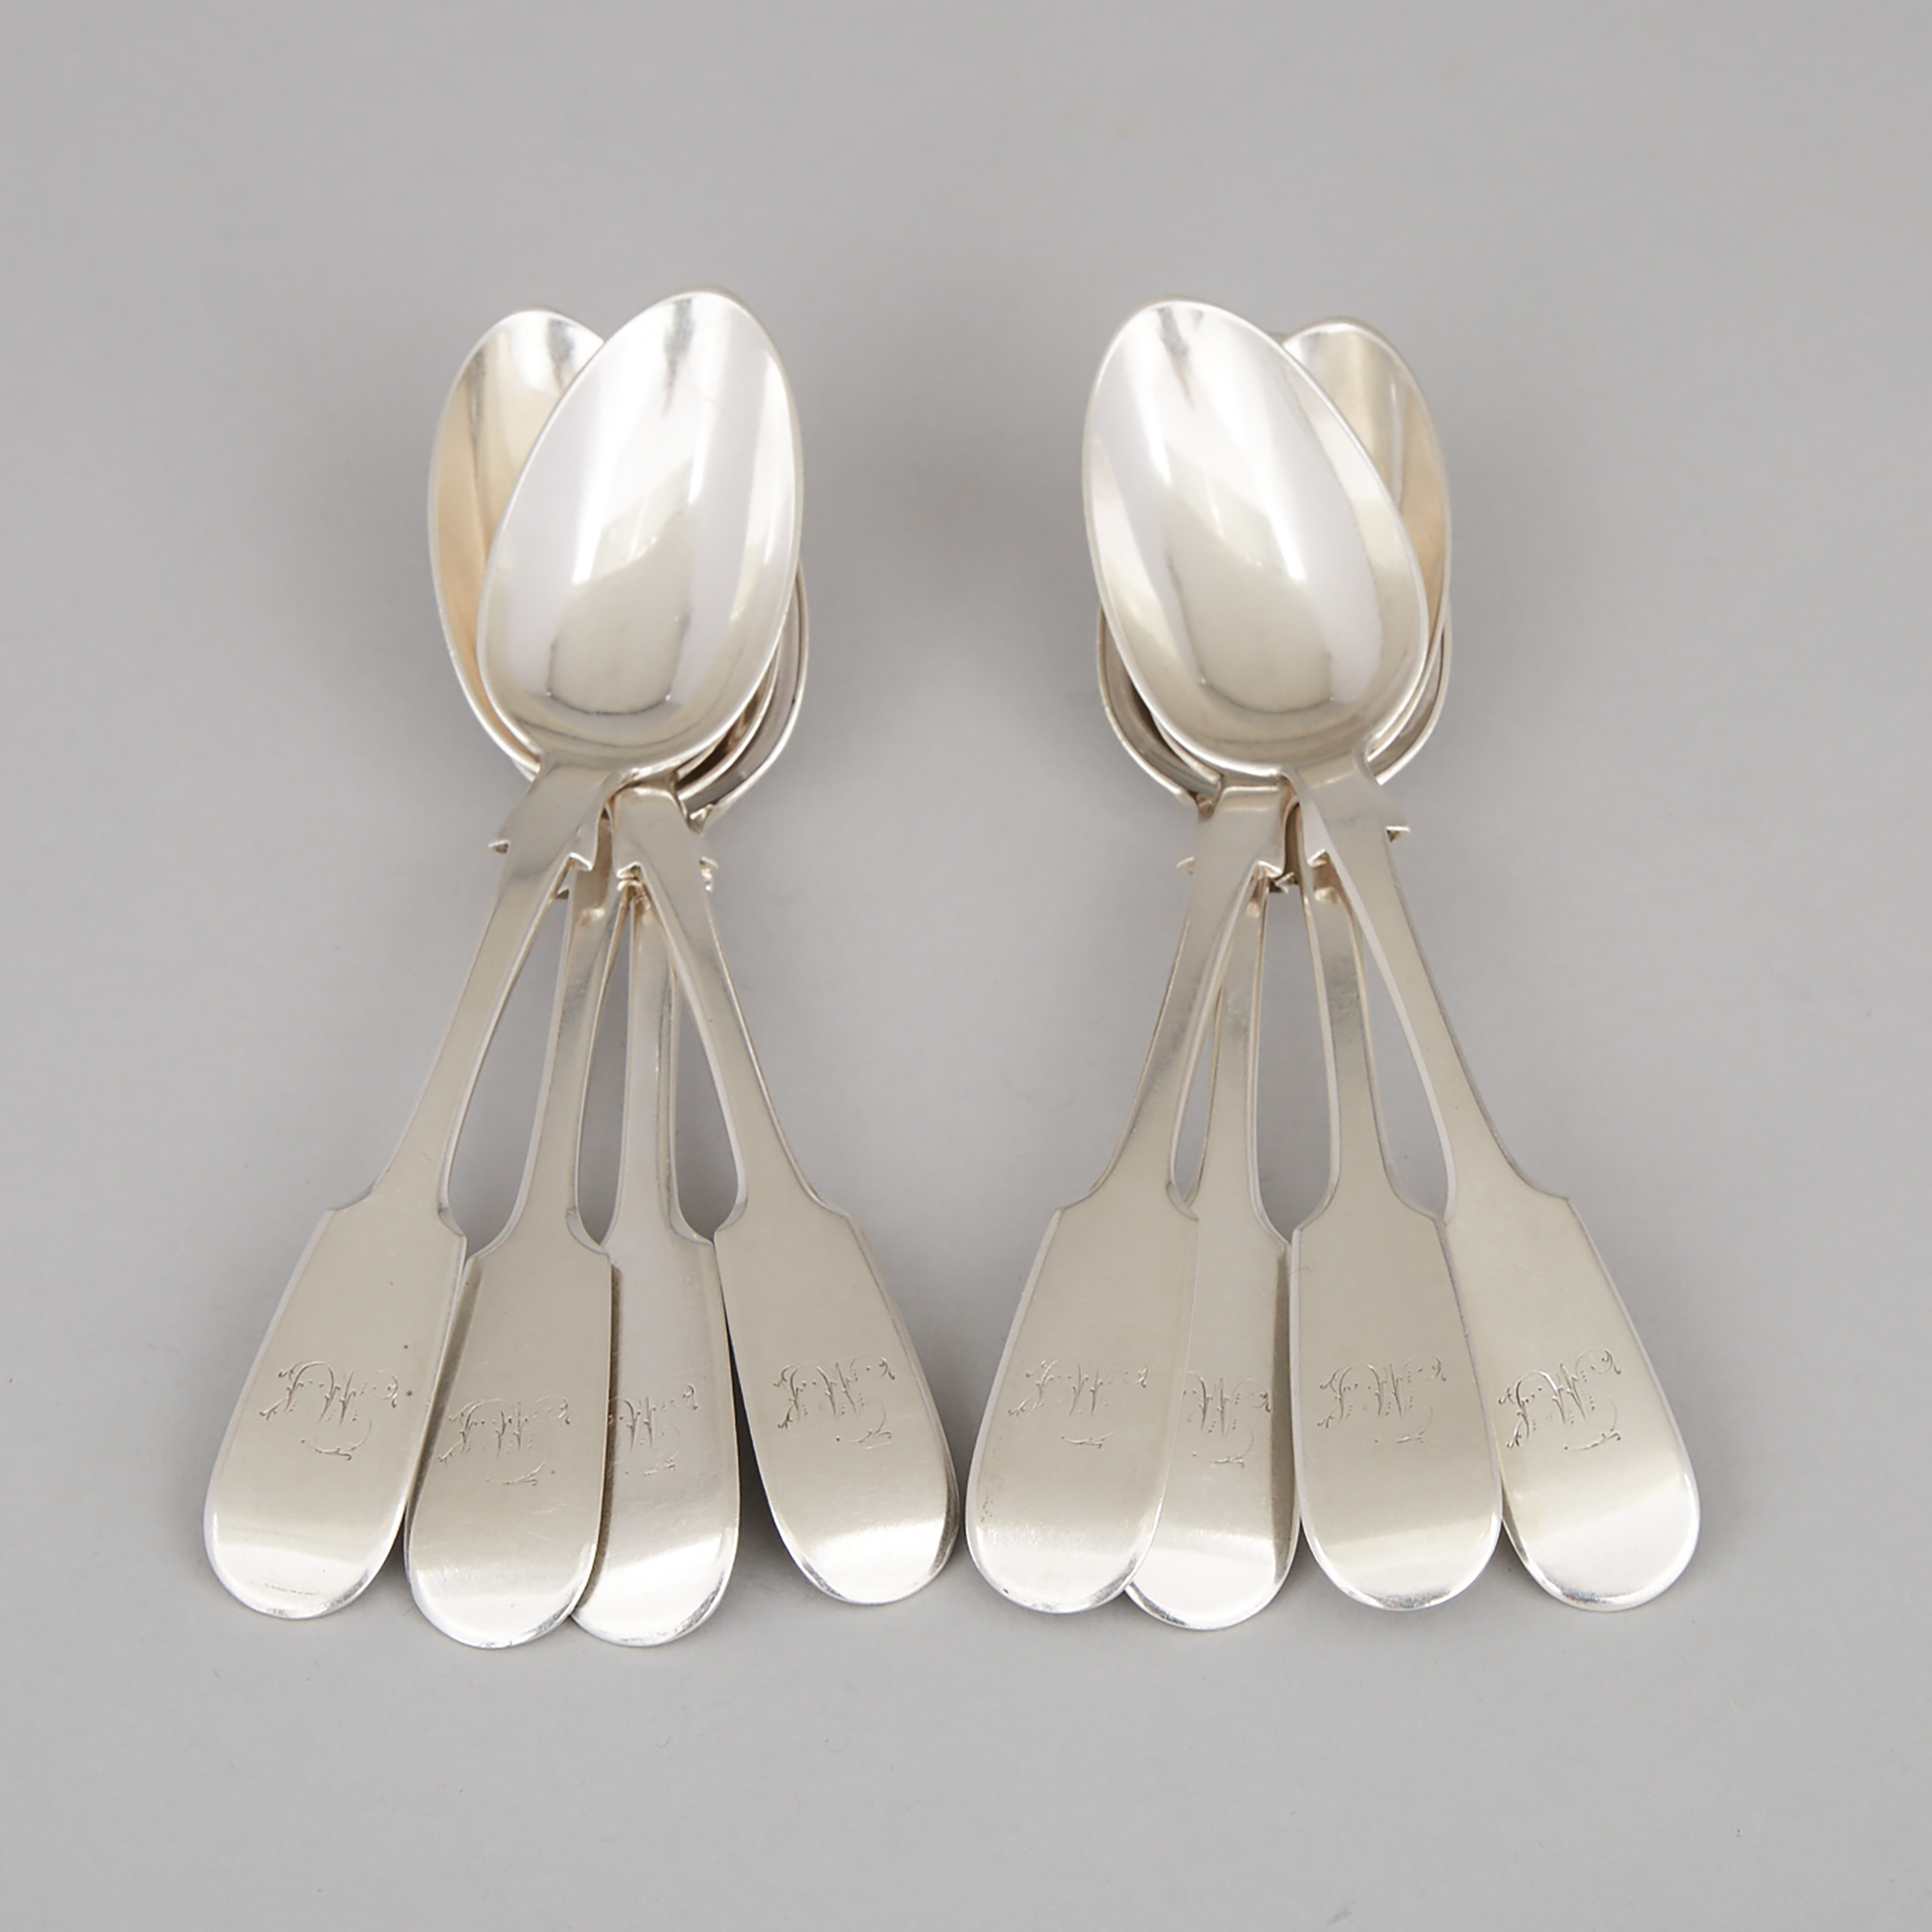 Eight Canadian Fiddle Pattern Dessert Spoons, Robert Hendery & Co., for William Walker, Montreal, Que., c.1880